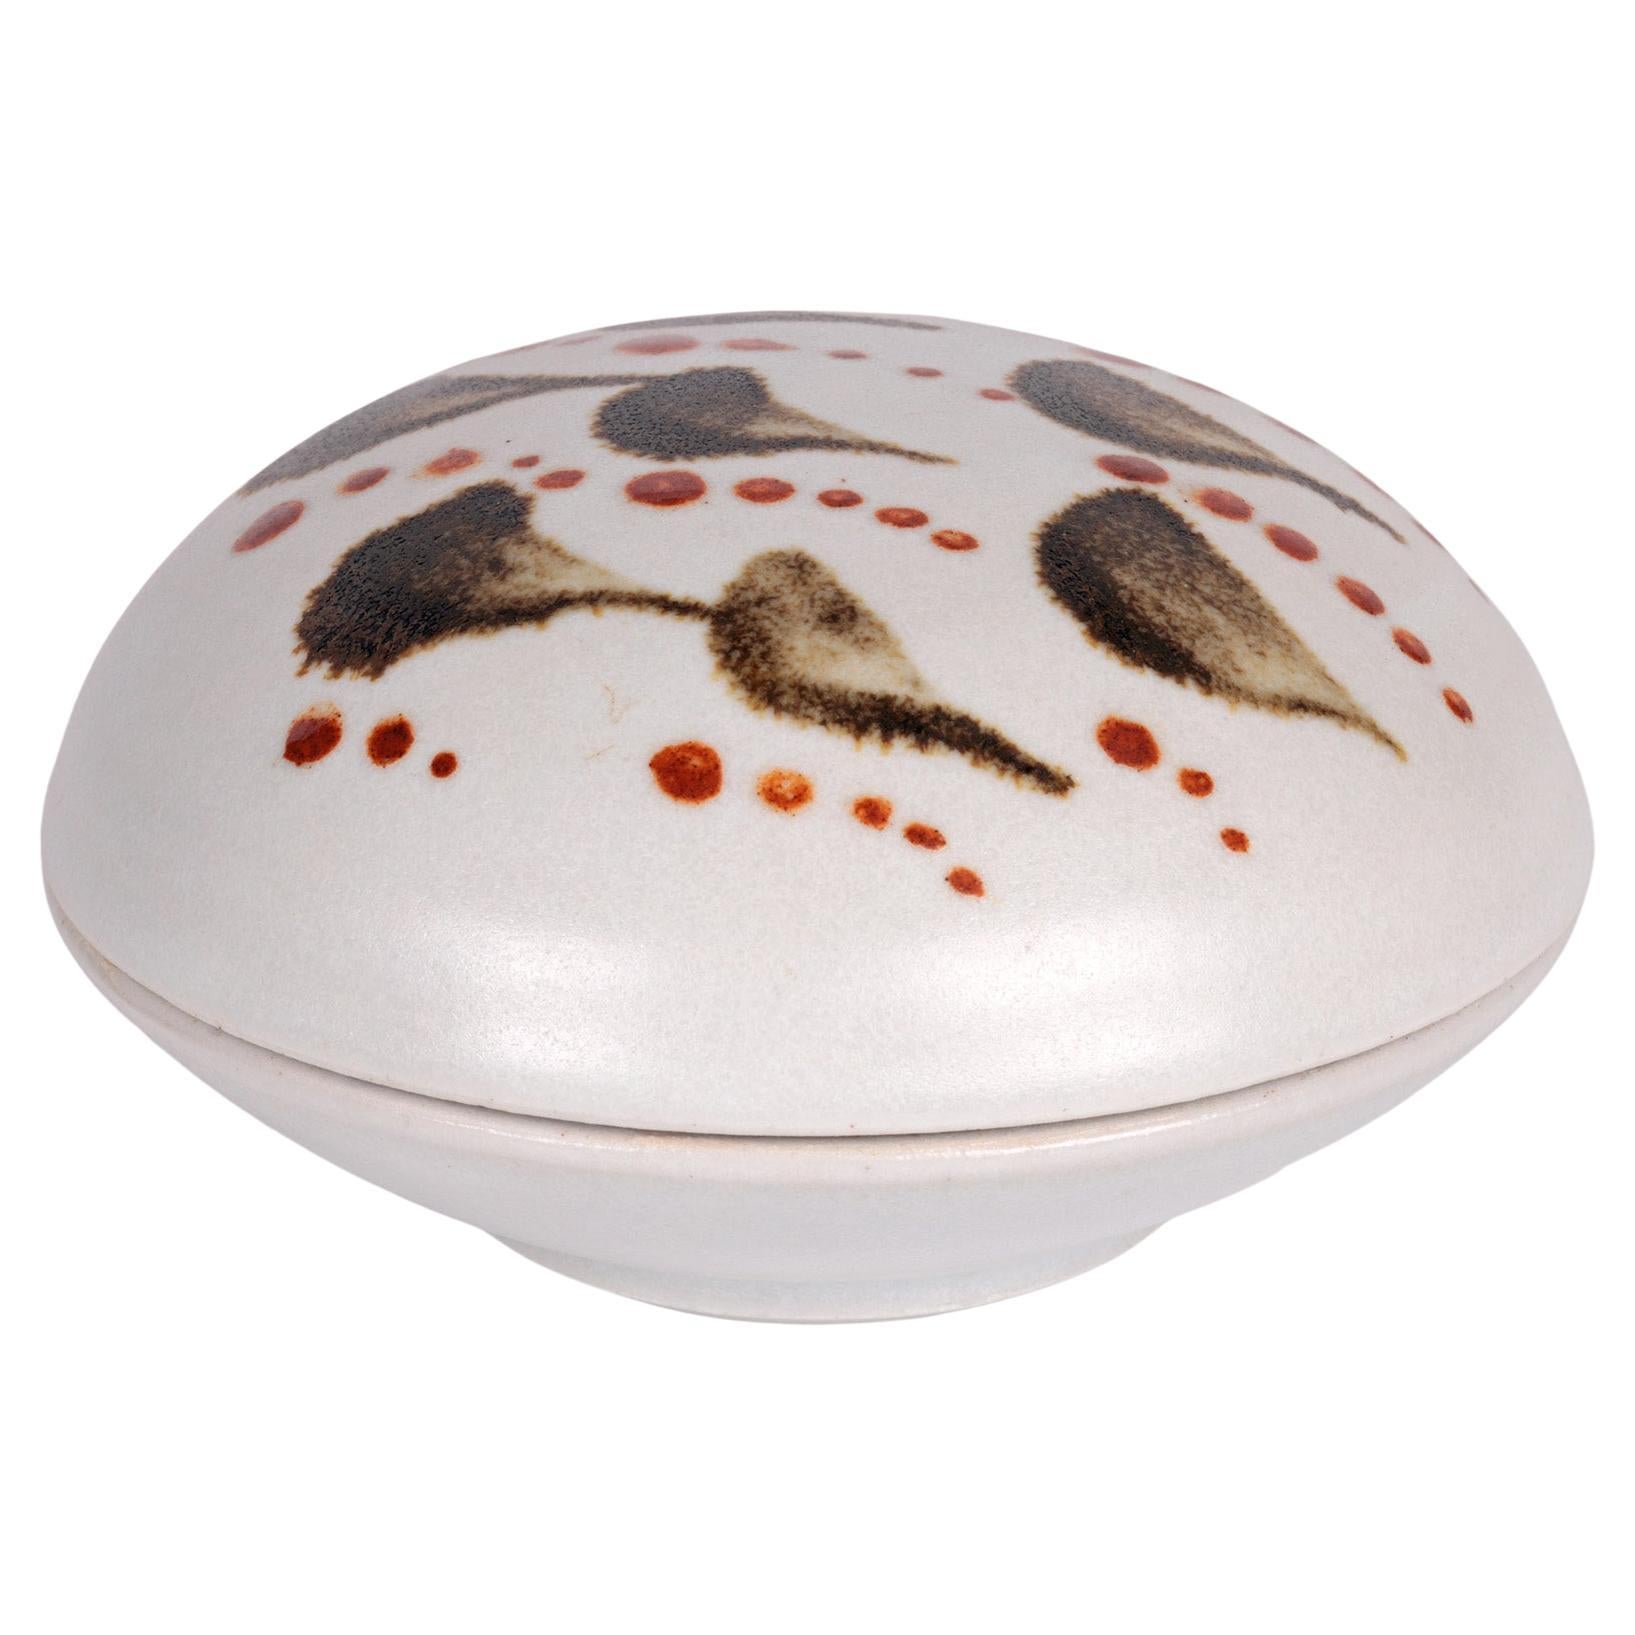 Amanda Brier Leach Pottery Porcelain Lidded Box with Stylized Leaf Patterning  For Sale